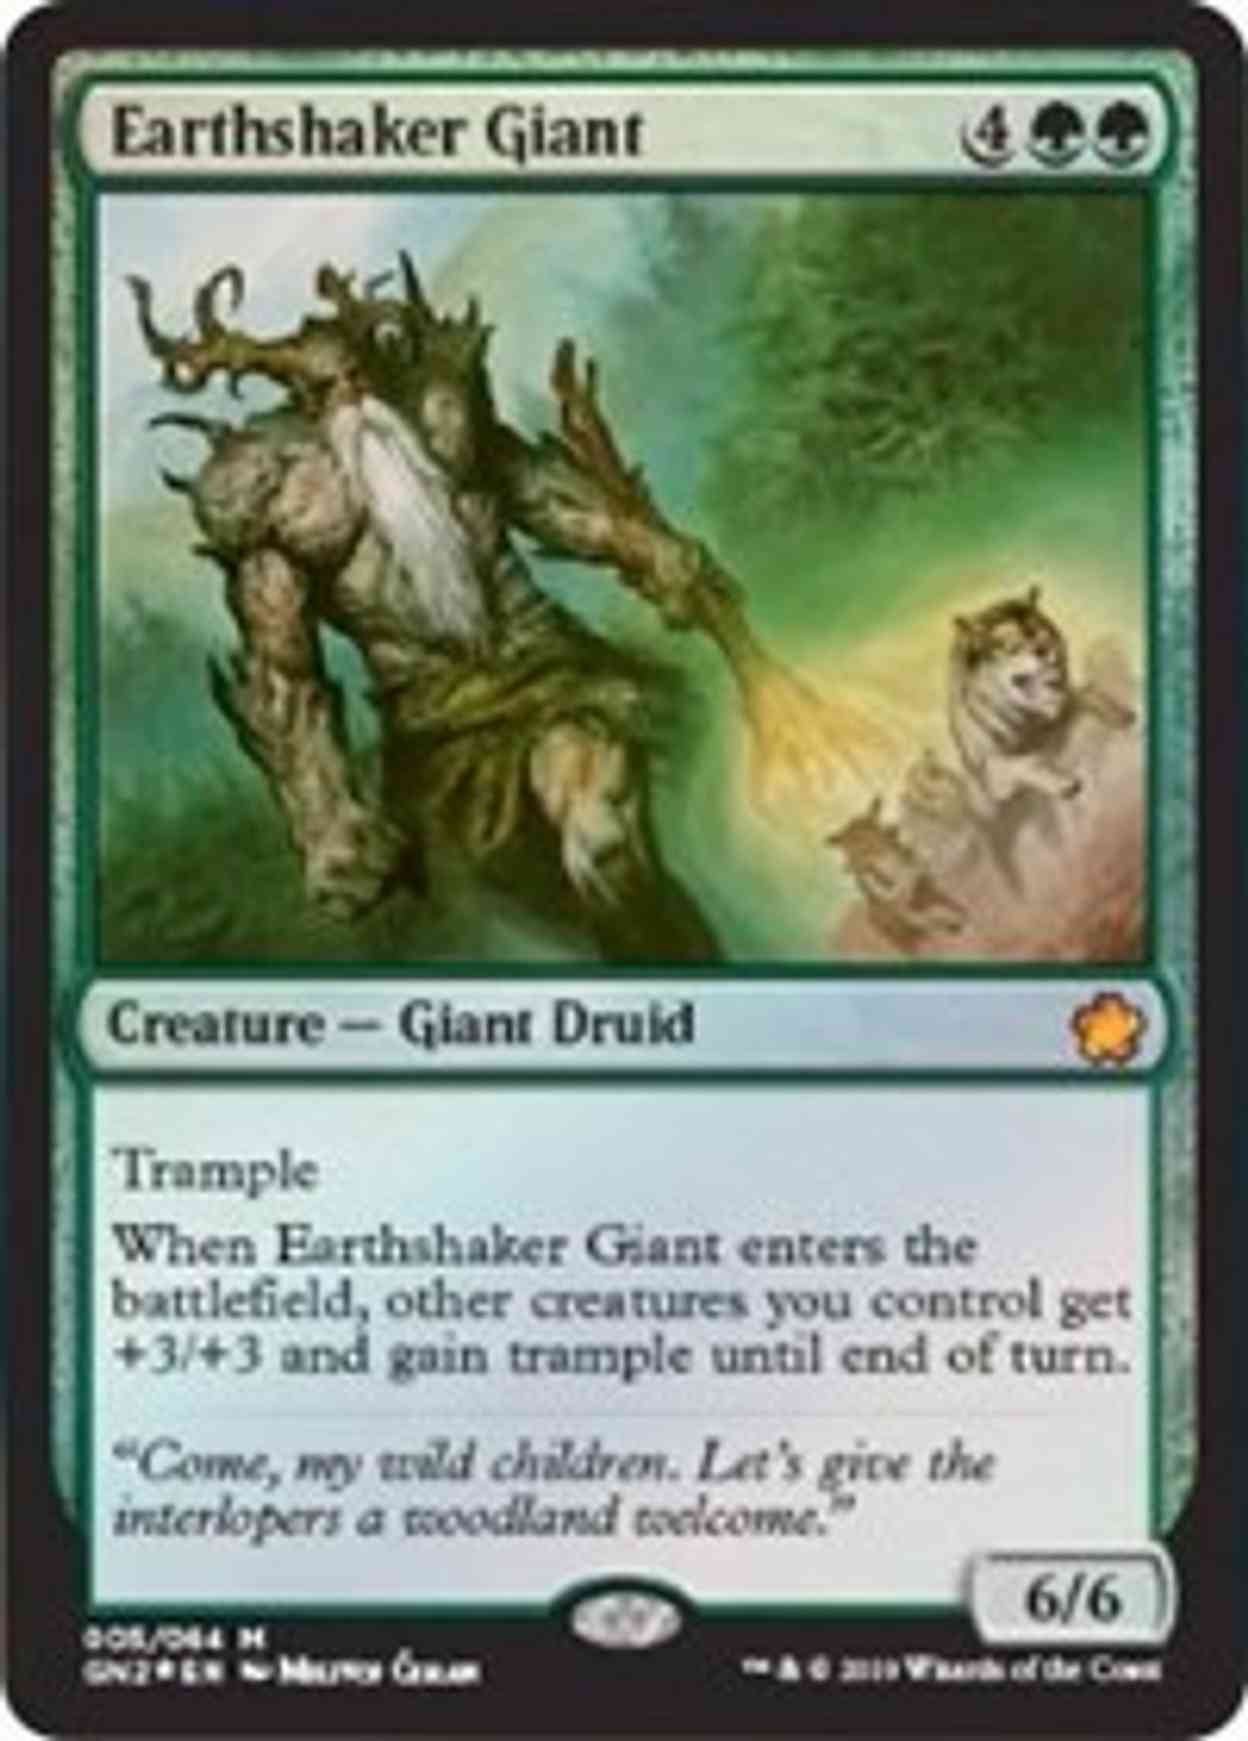 Earthshaker Giant magic card front